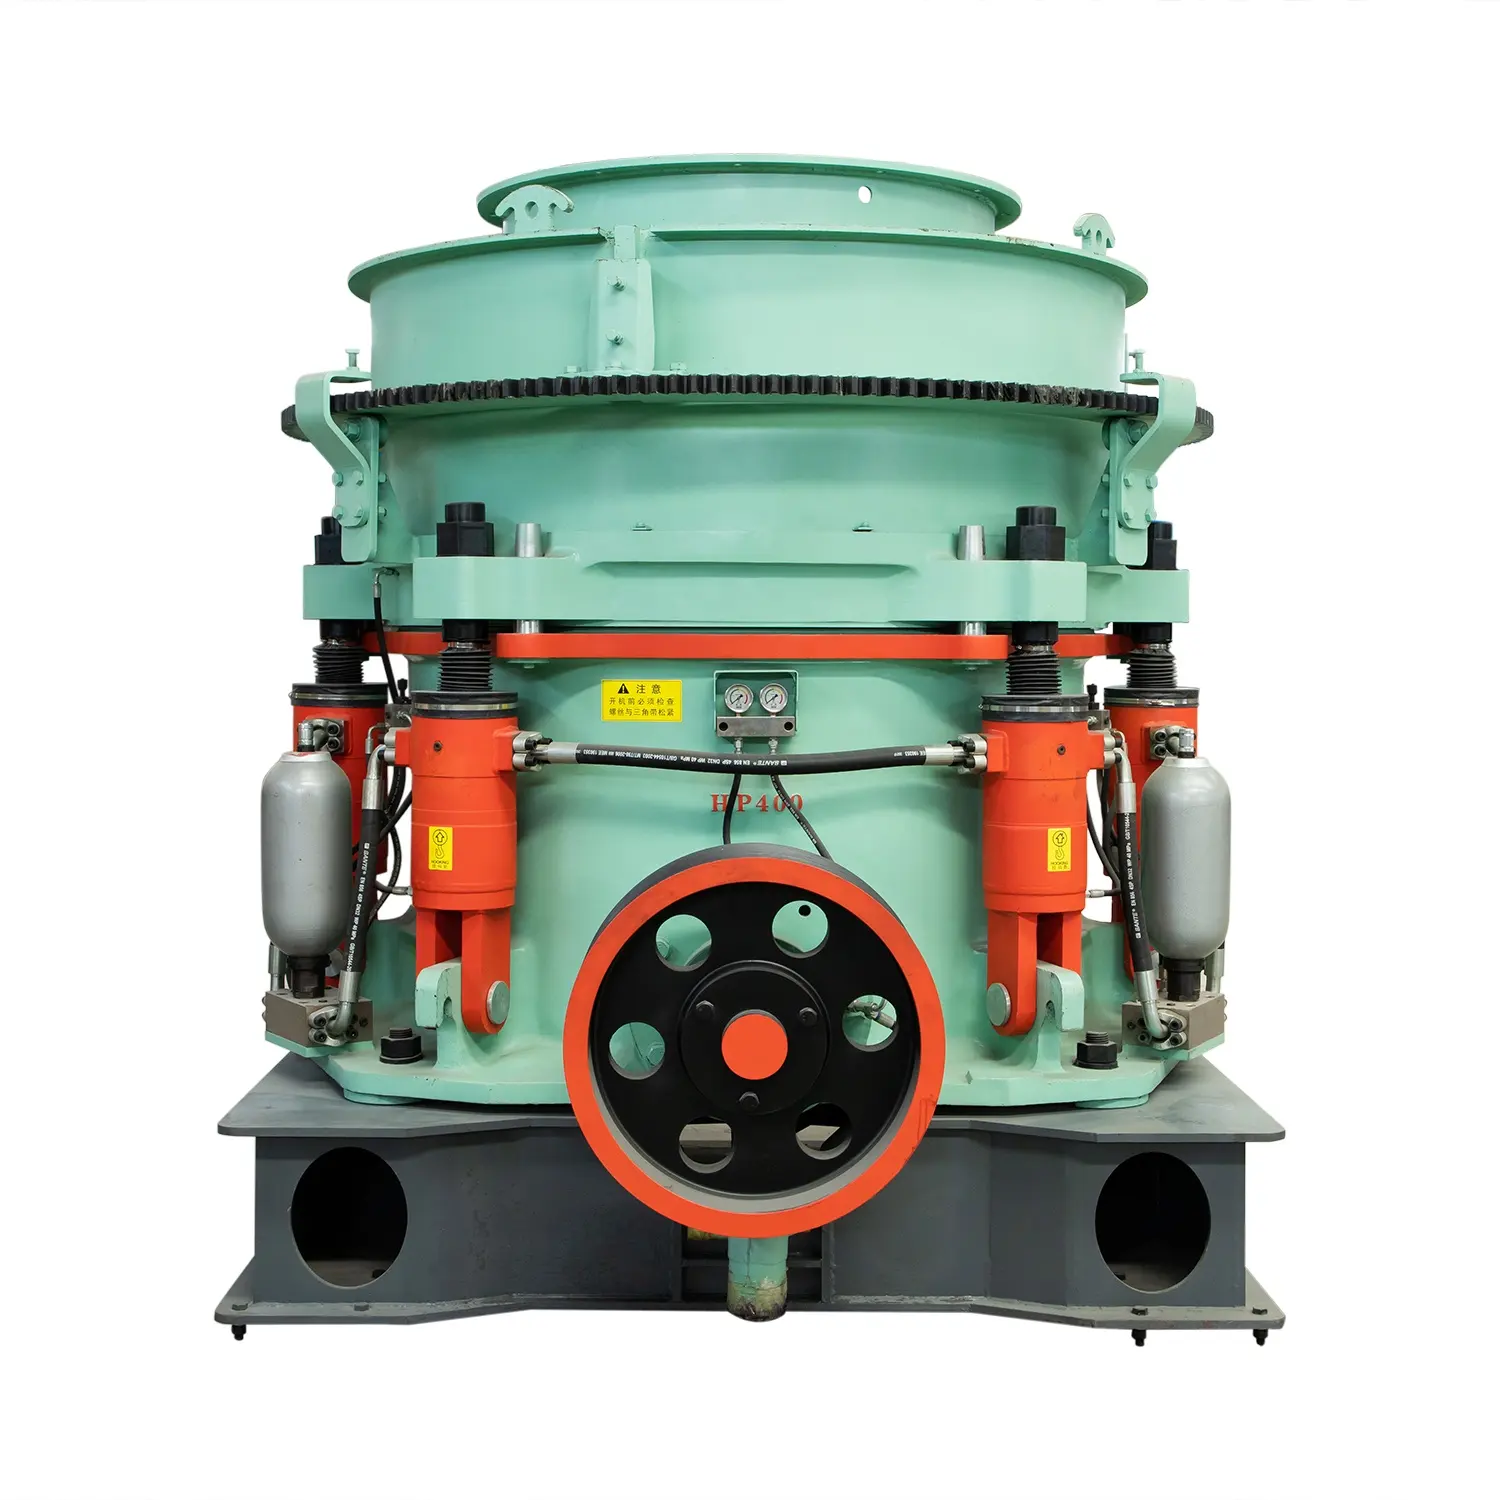 High Performance Low Cost Large Crushing Force HP Multi-Cylinder Hydraulic Cone Stone Crusher